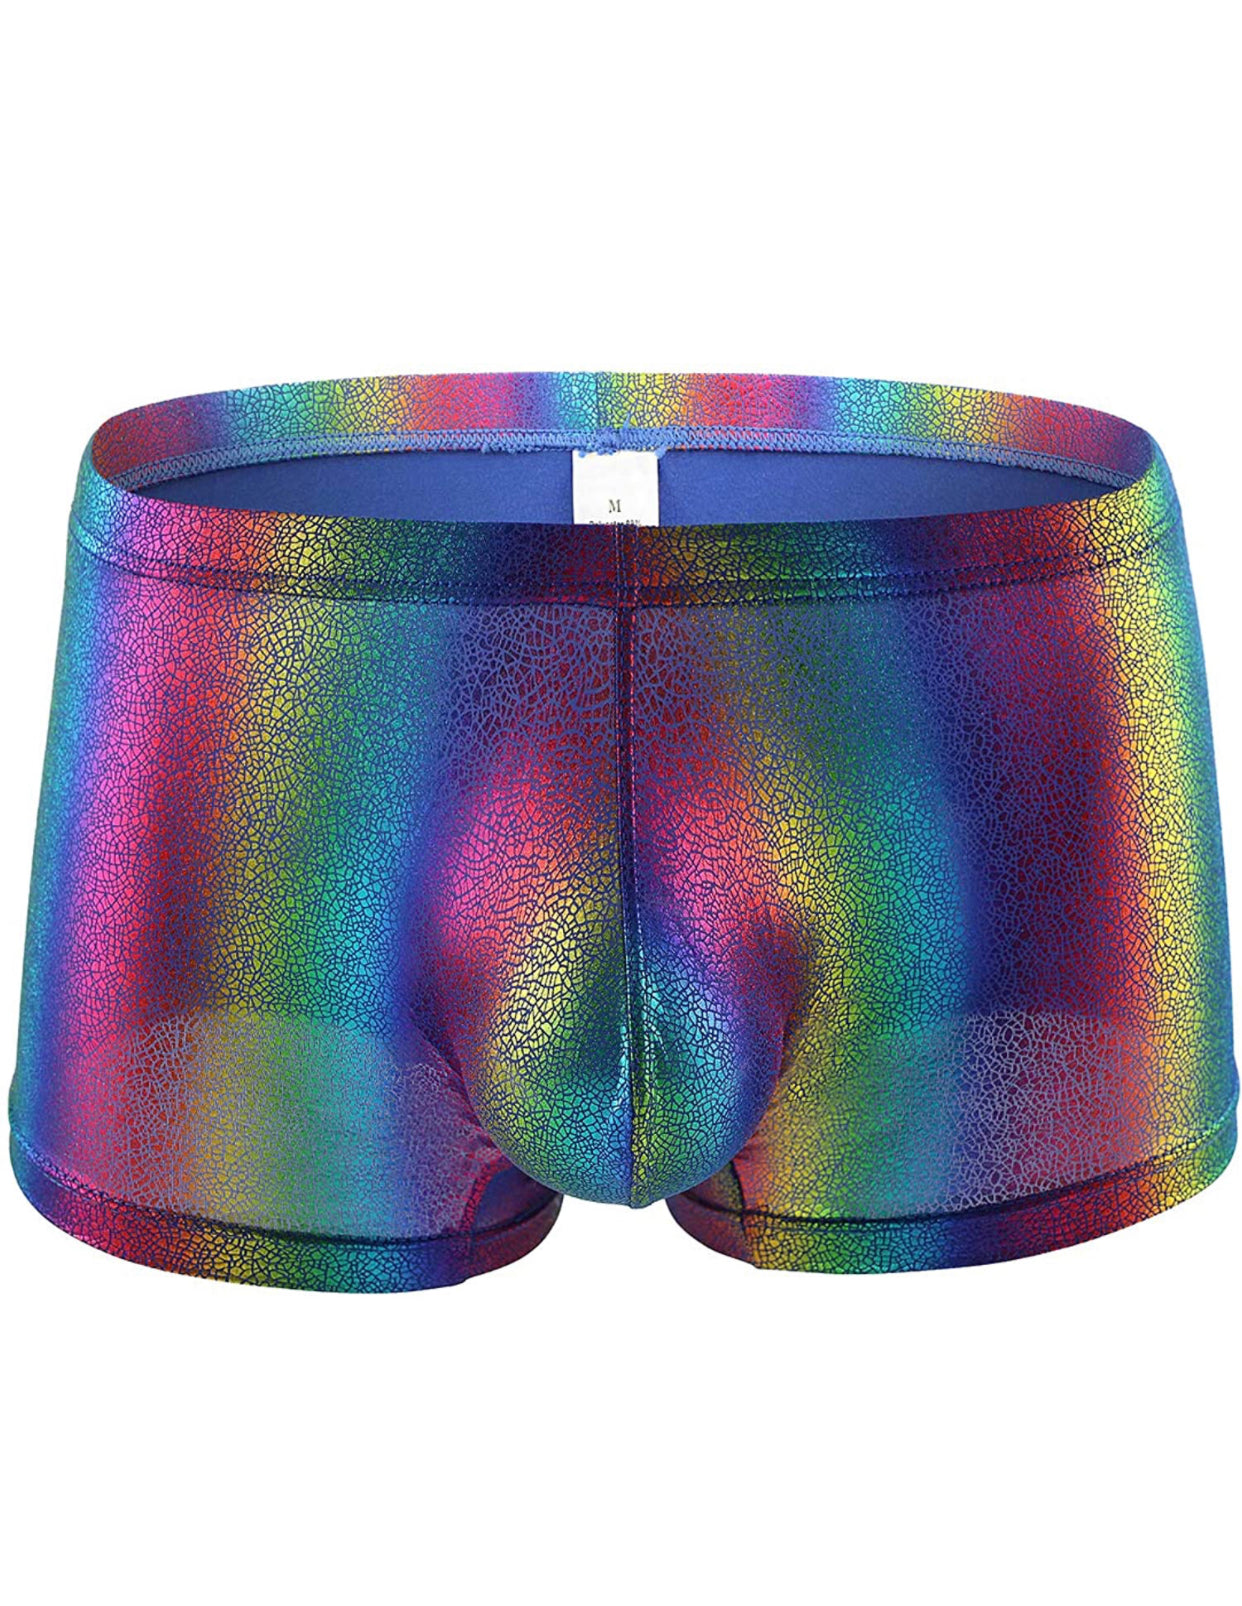 The Royale Flyness “Prismatic” trunk underwear – royaleflyness